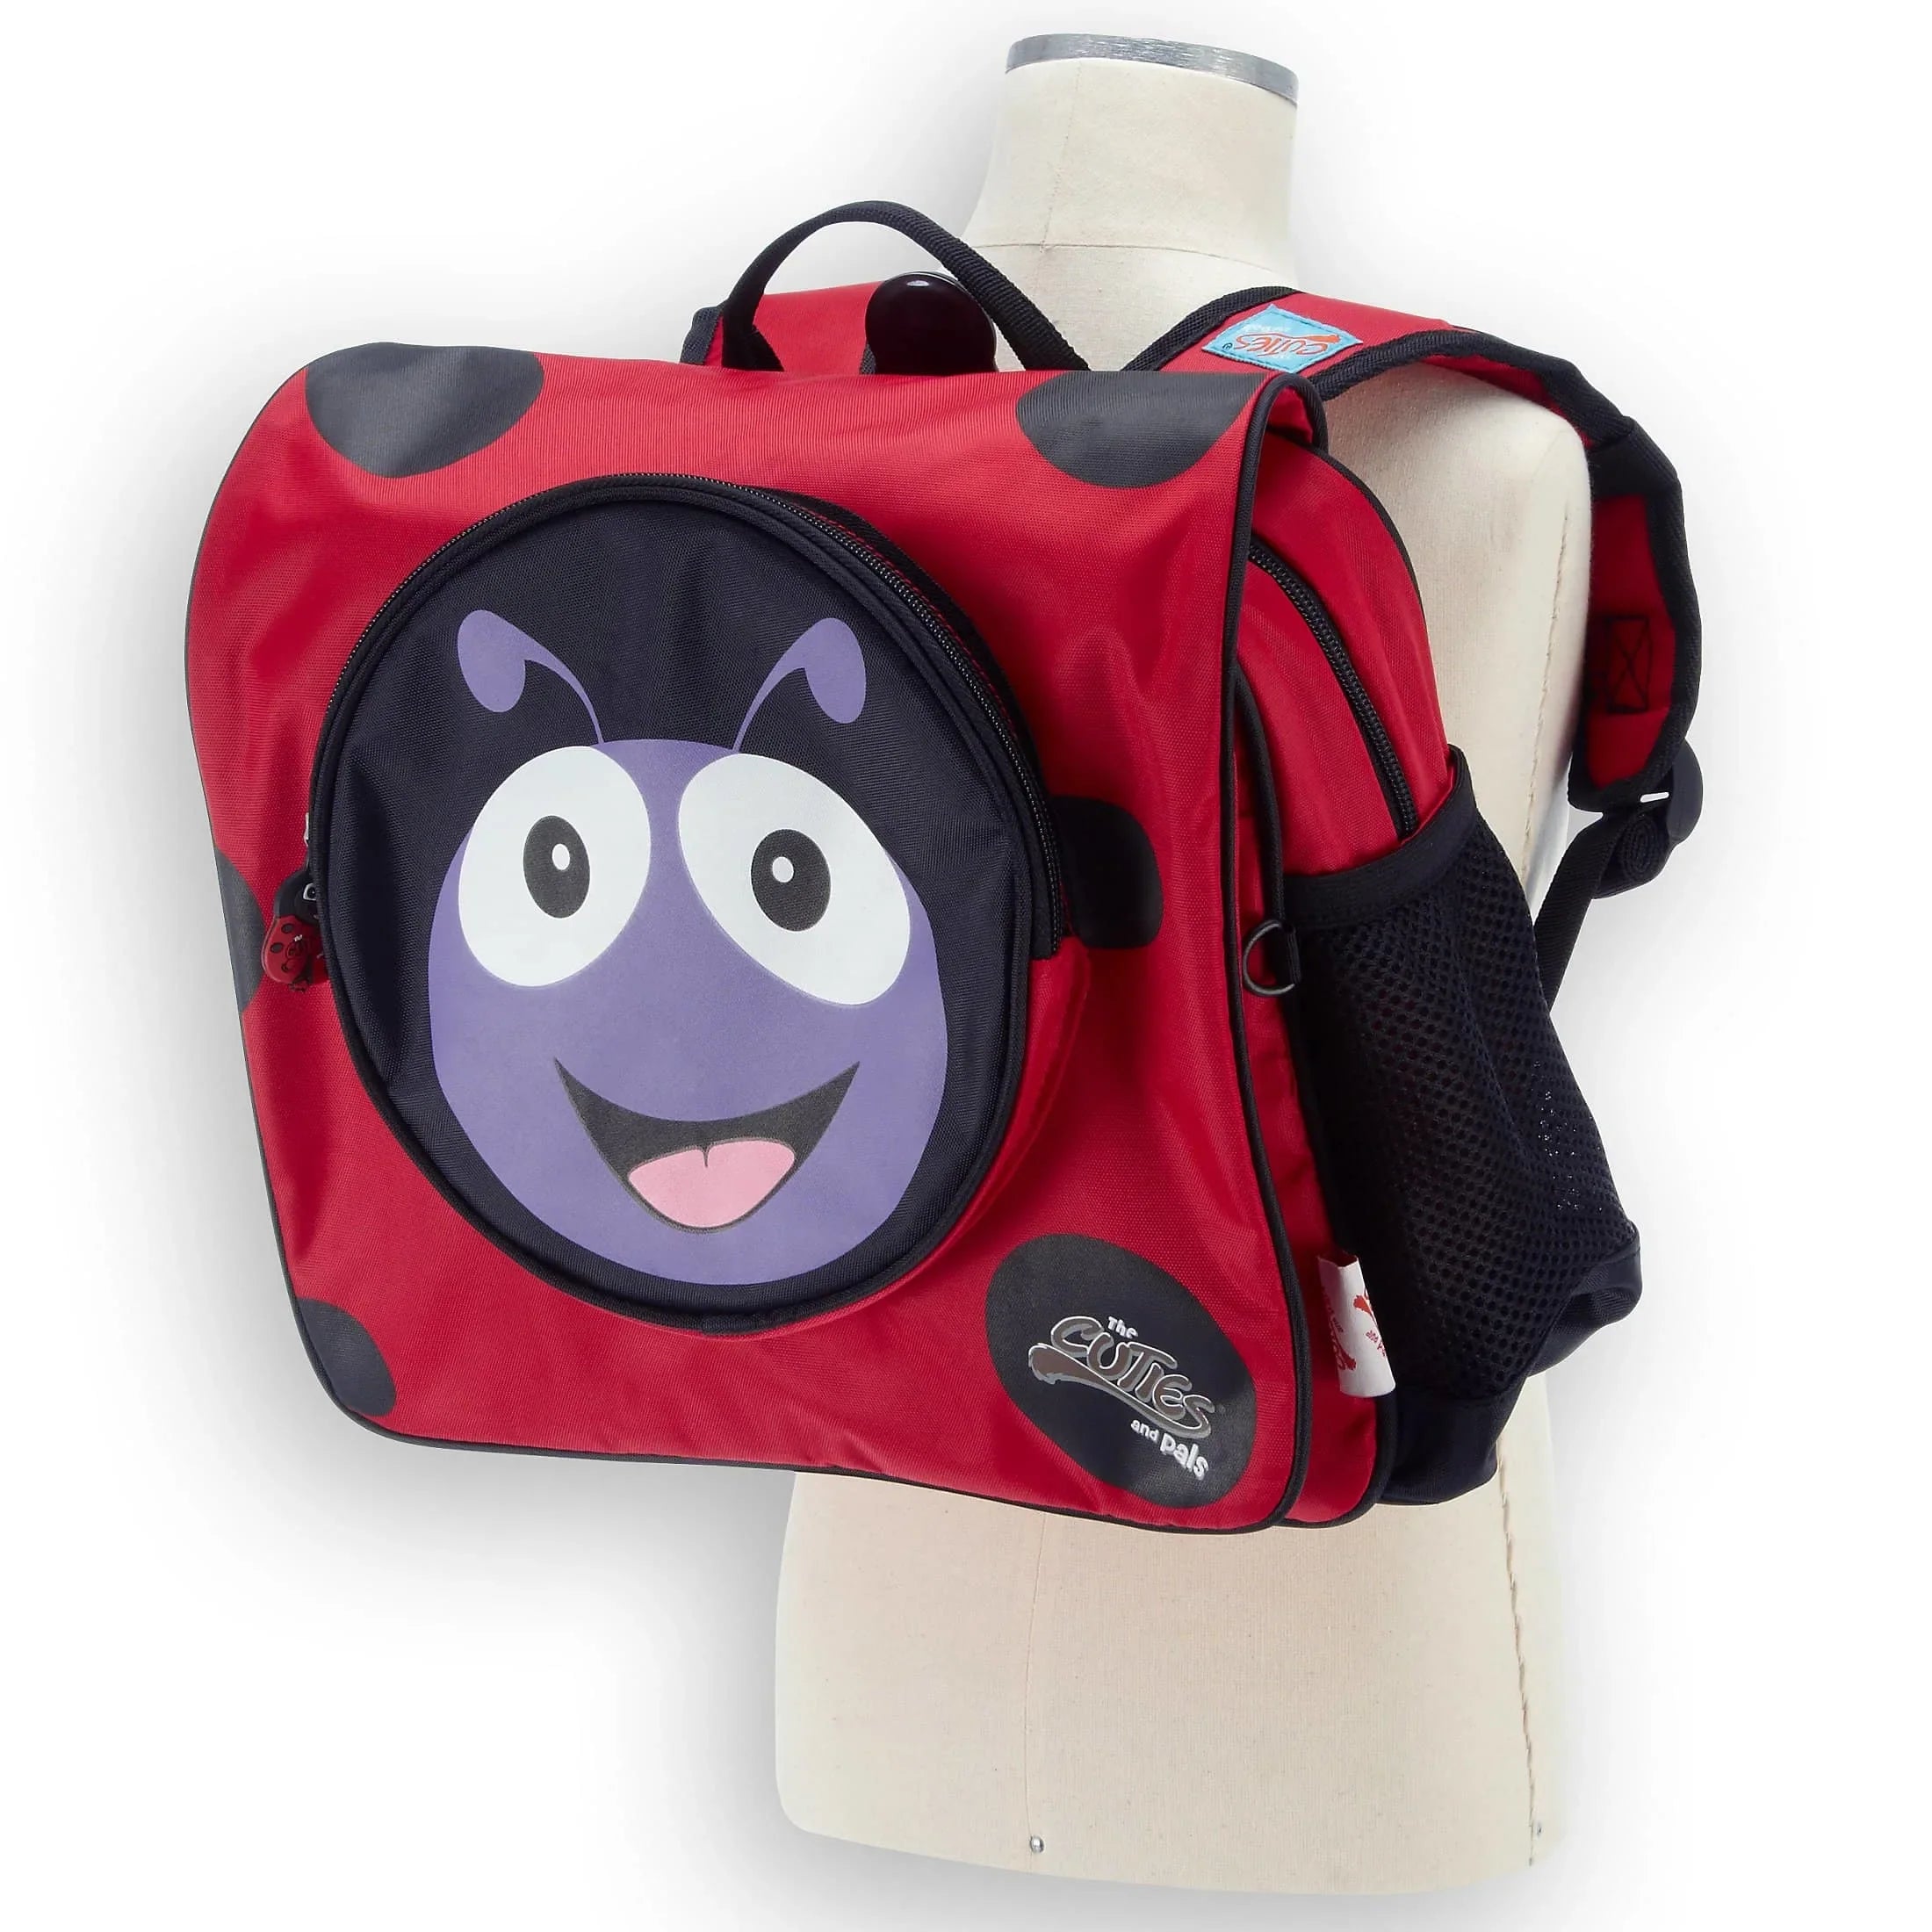 The Cuties and Pals Soft Cuties Rucksack 30 cm - Dino